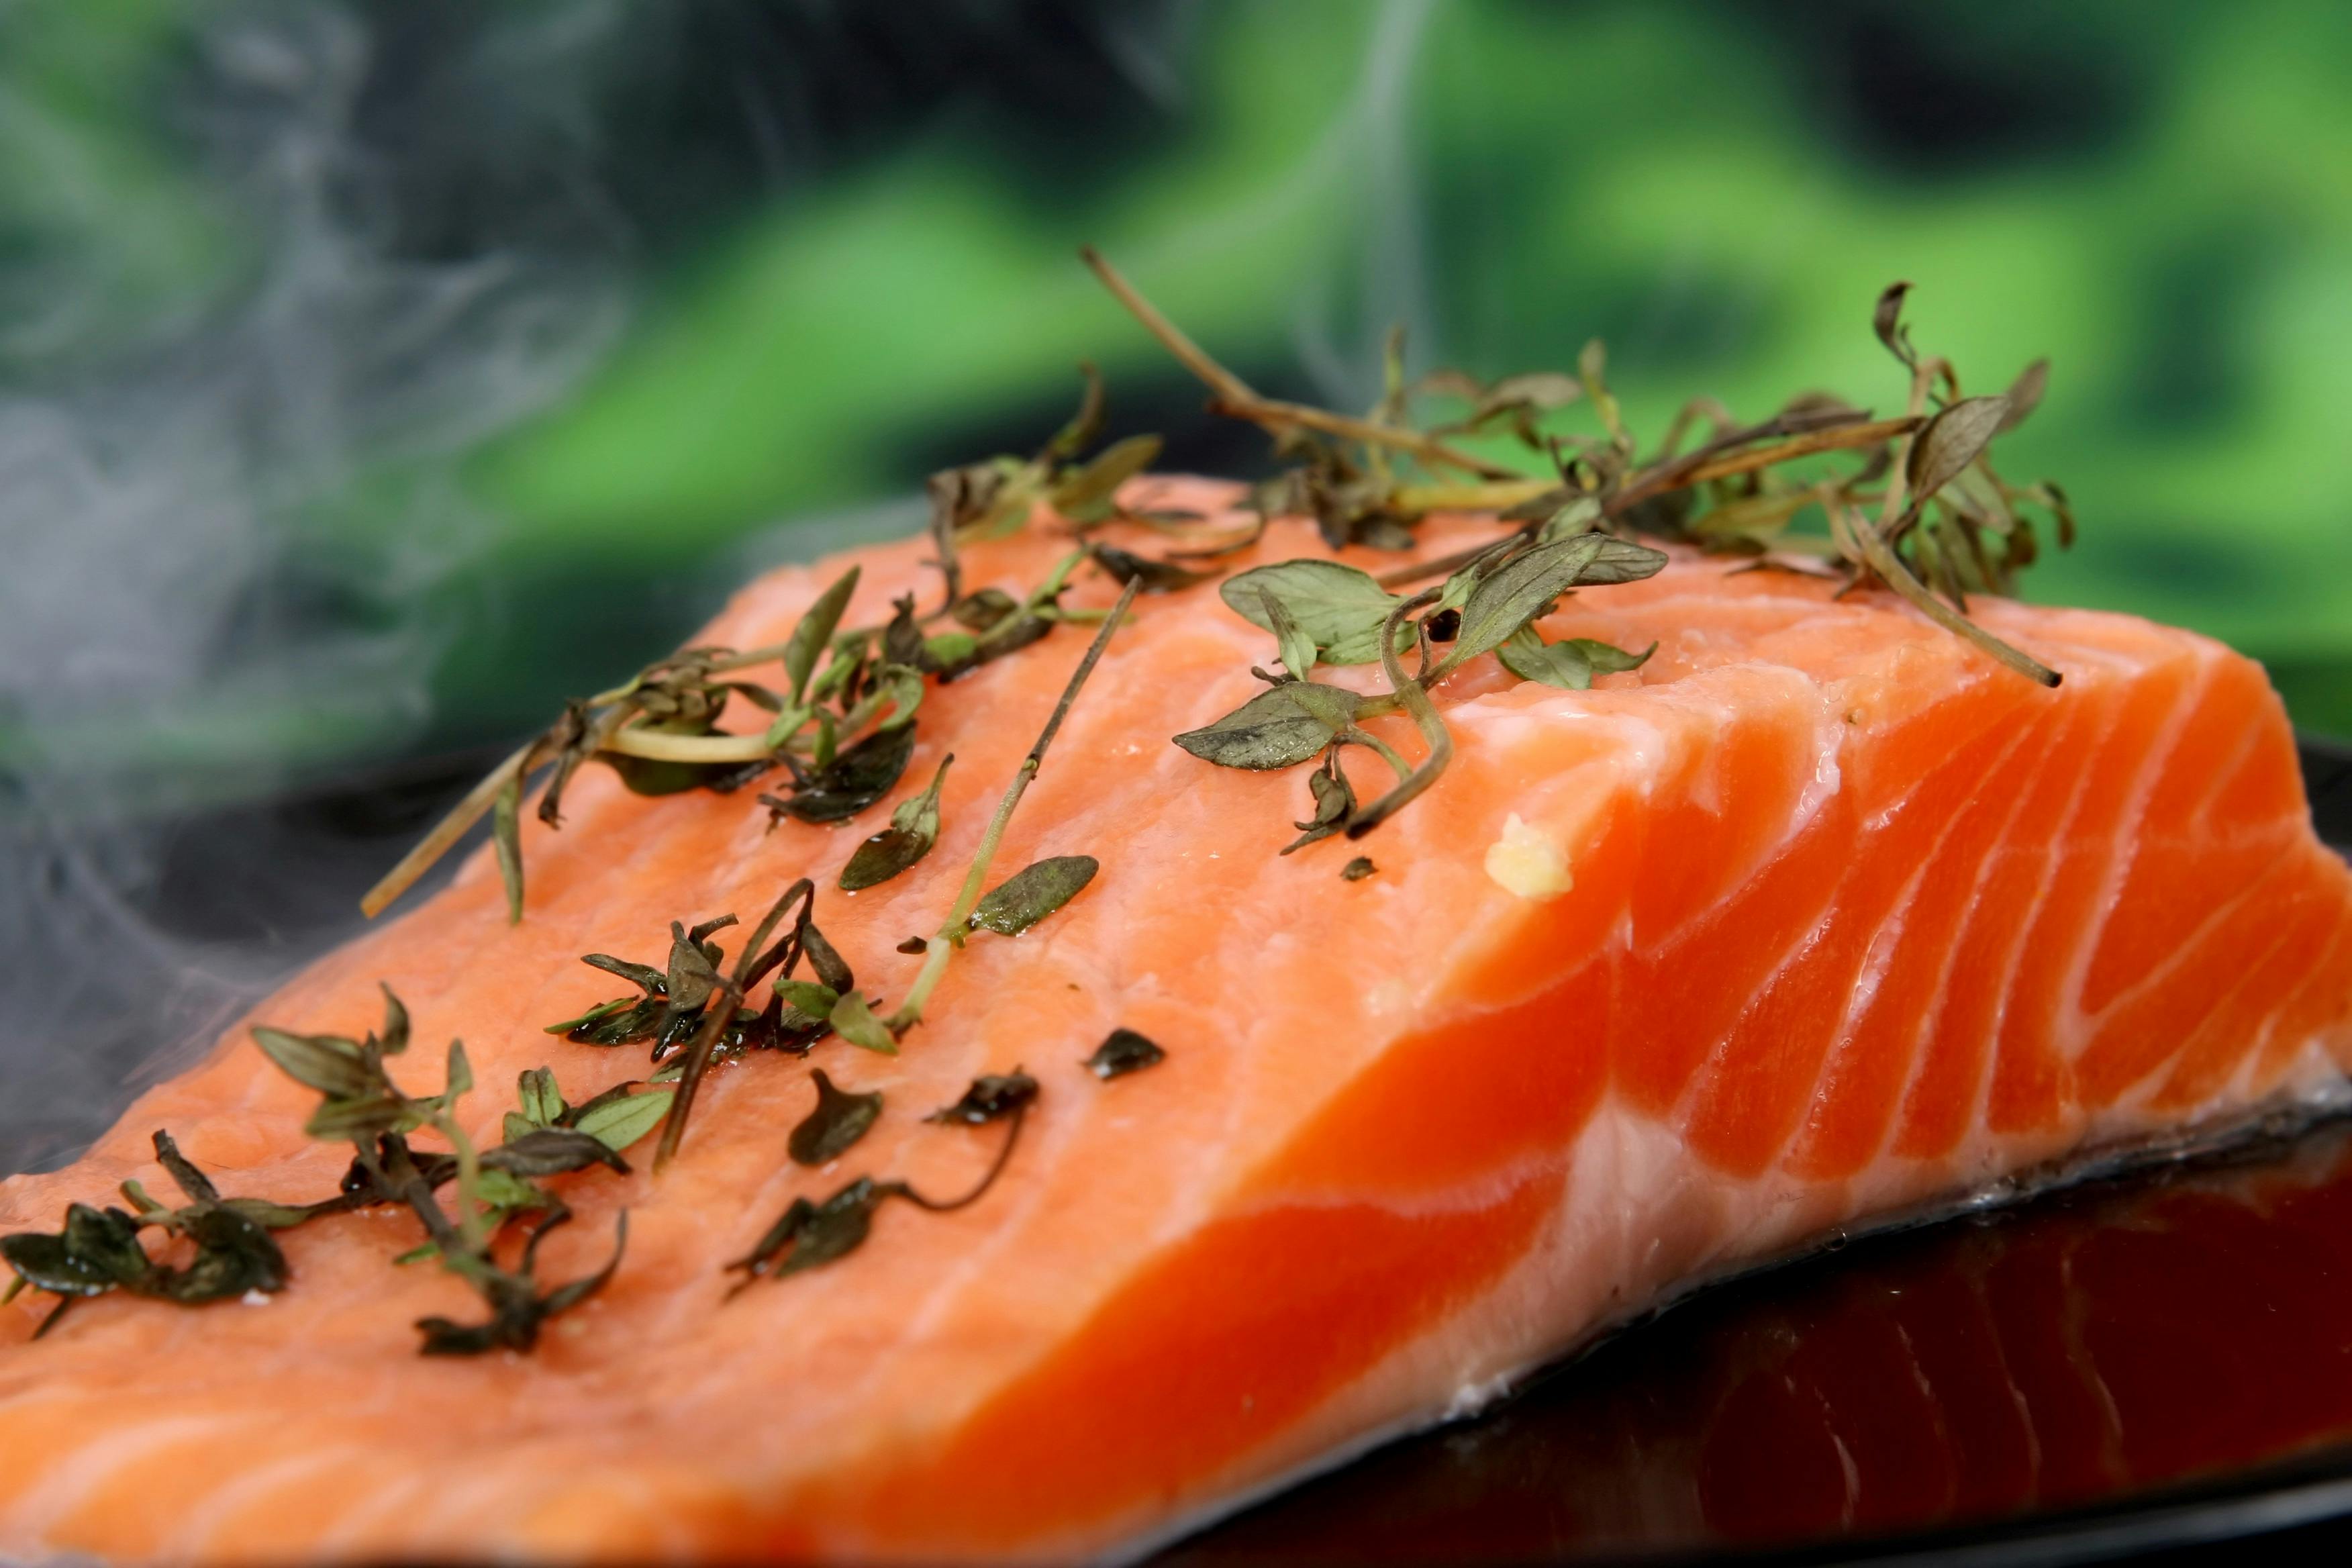 Fresh fish is a great source of omega-3's and healthy fats.